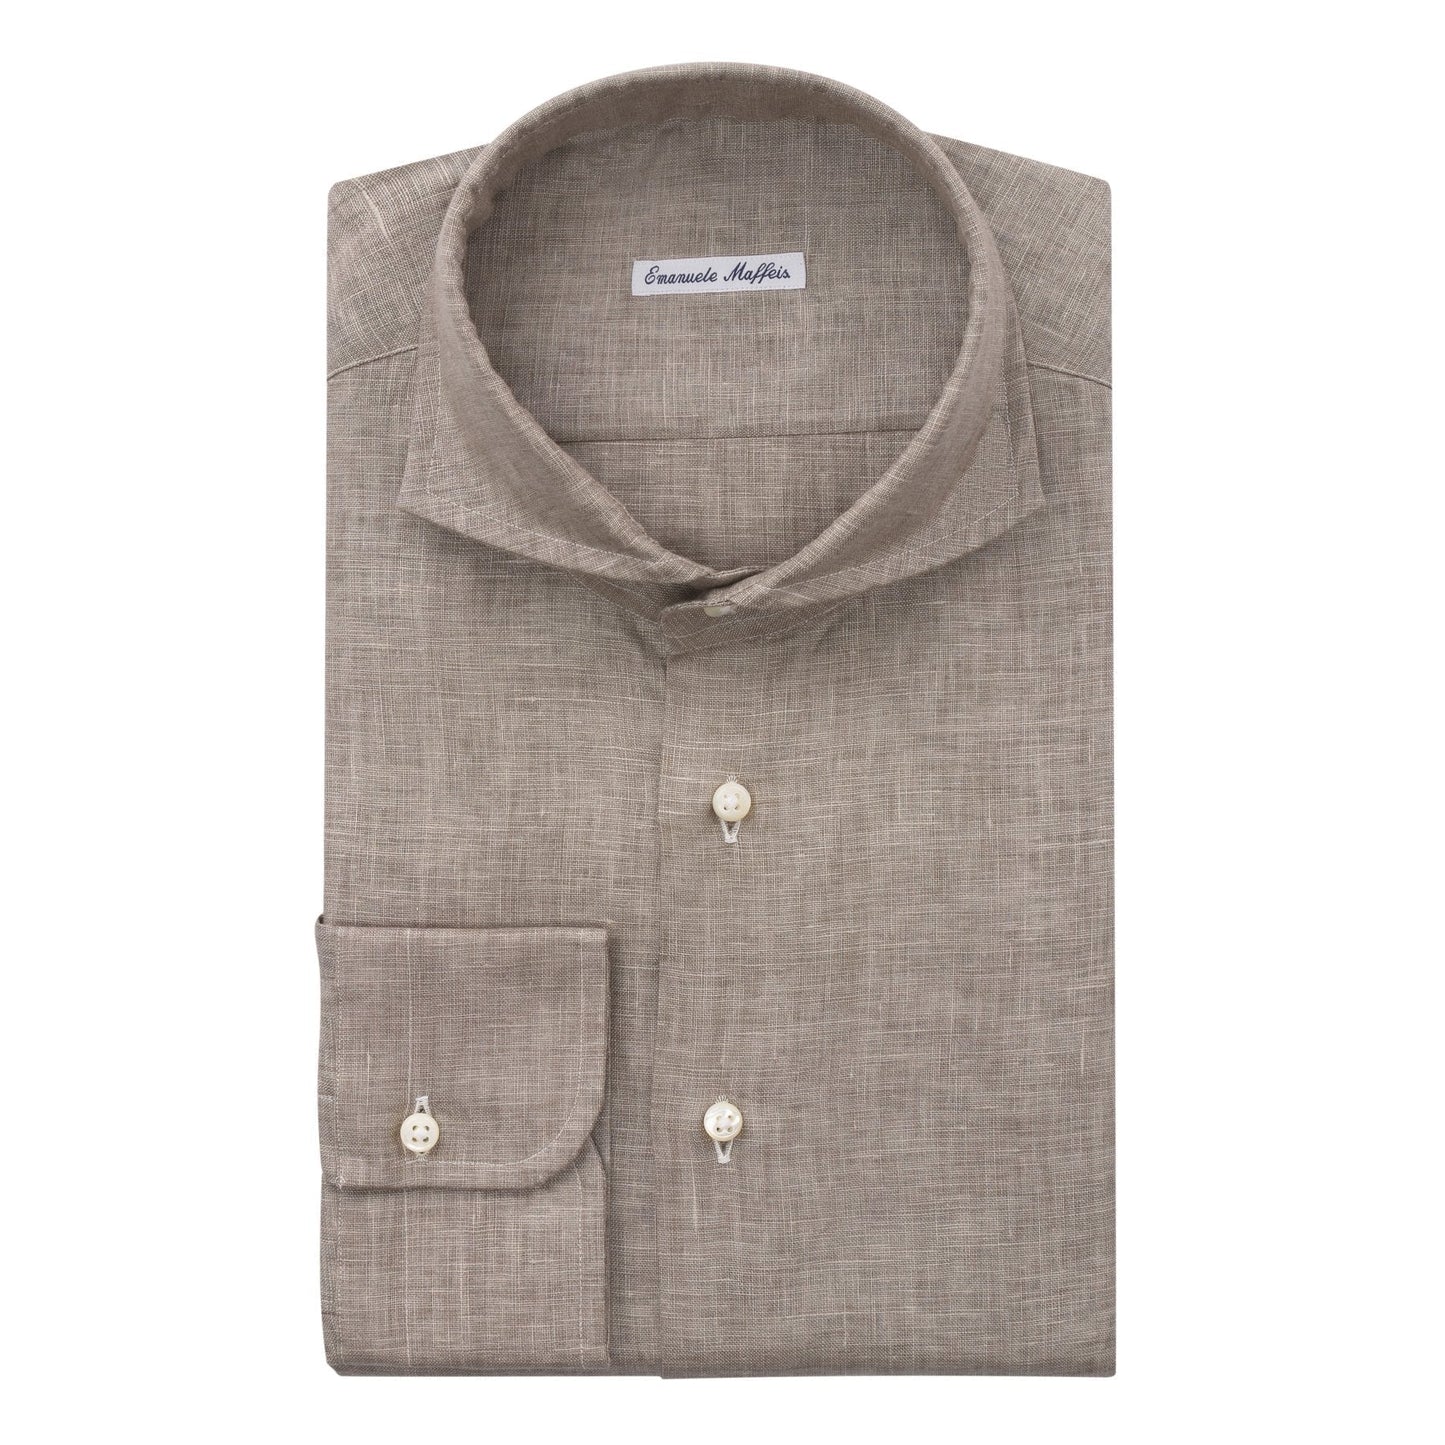 Emanuele Maffeis Linen Light Brown Shirt with Round French Cuff - SARTALE